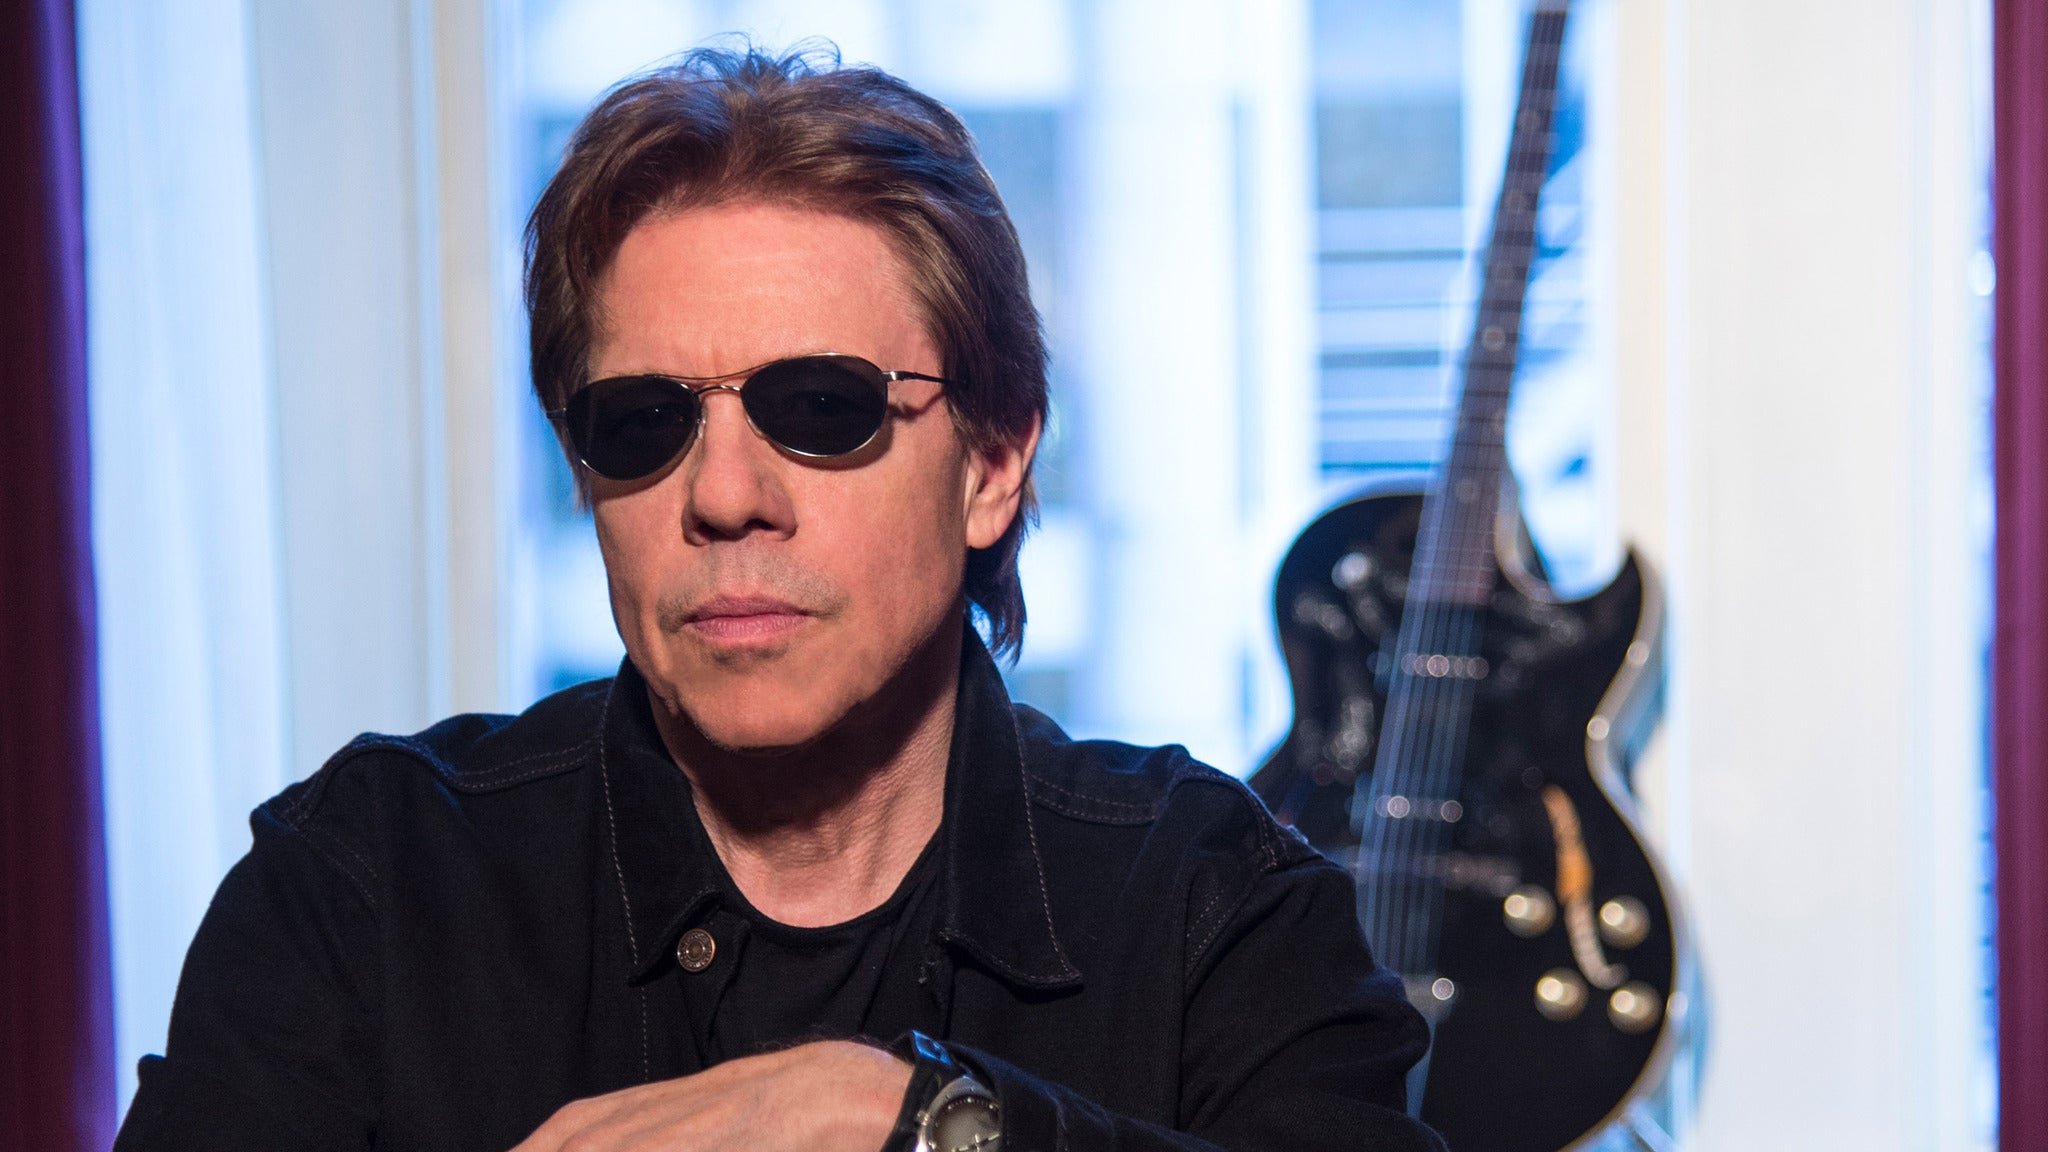 George Thorogood & The Destroyers at Saenger Theatre Mobile